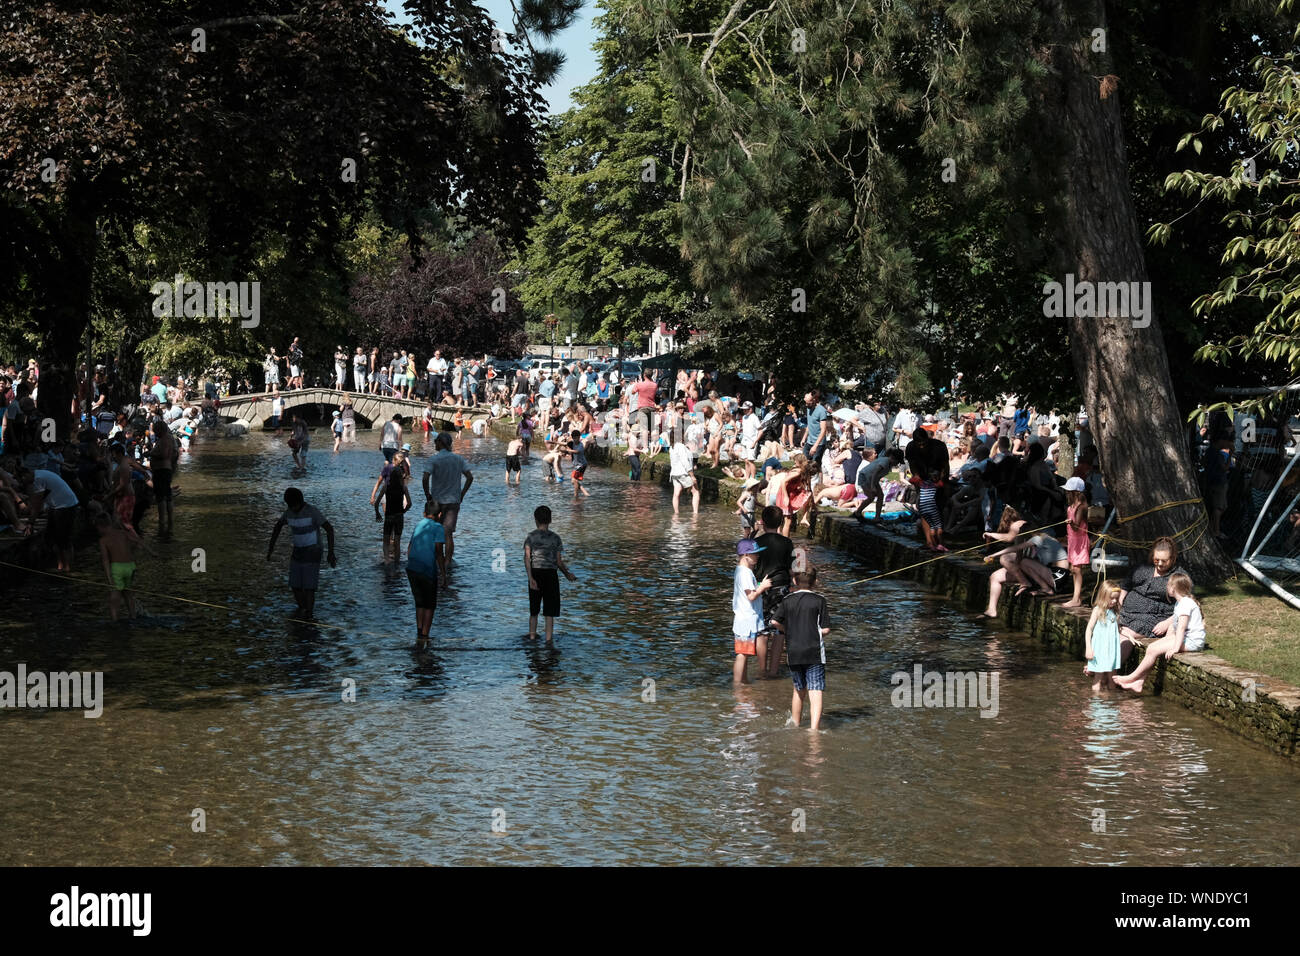 August Bank Holiday festivities in Bourton-on-the Water Gloucestershire UK. Paddling in the River. Stock Photo